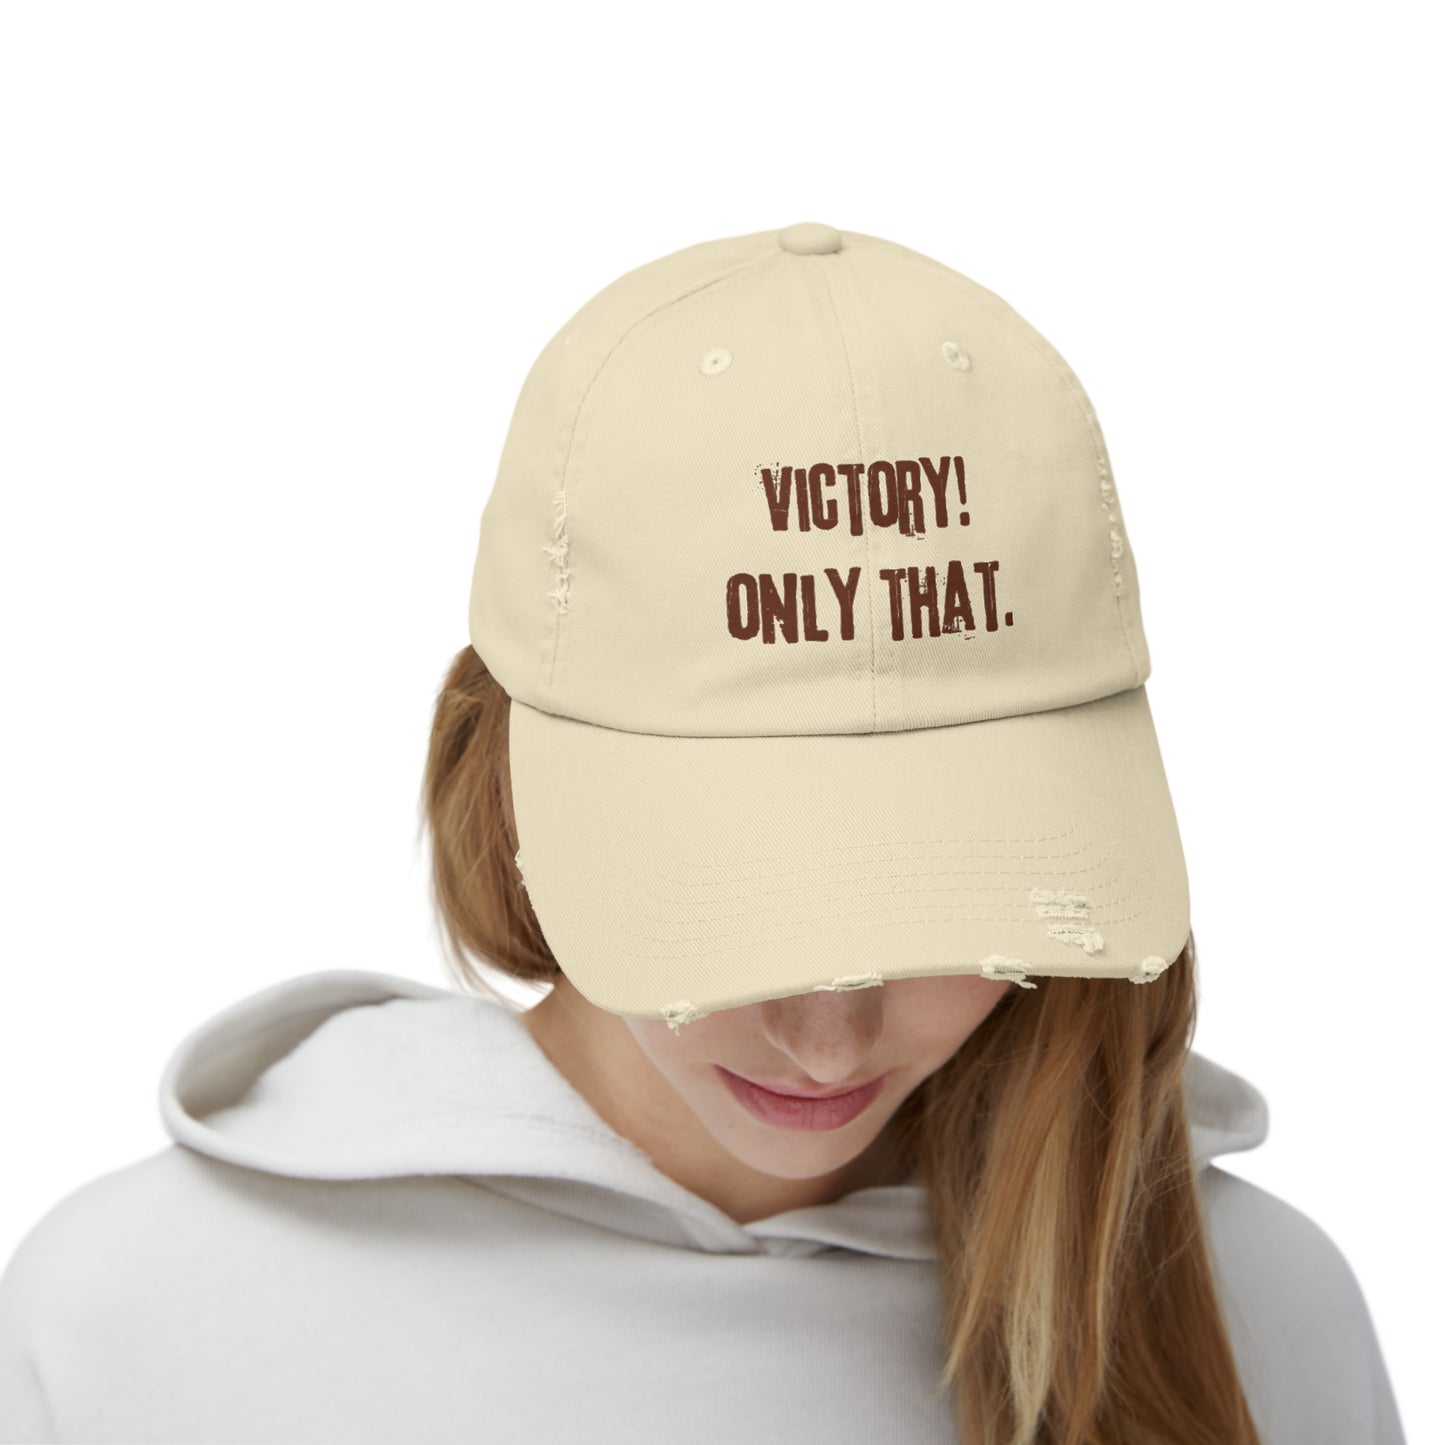 victory! only that.-gianna jessen distressed cap.